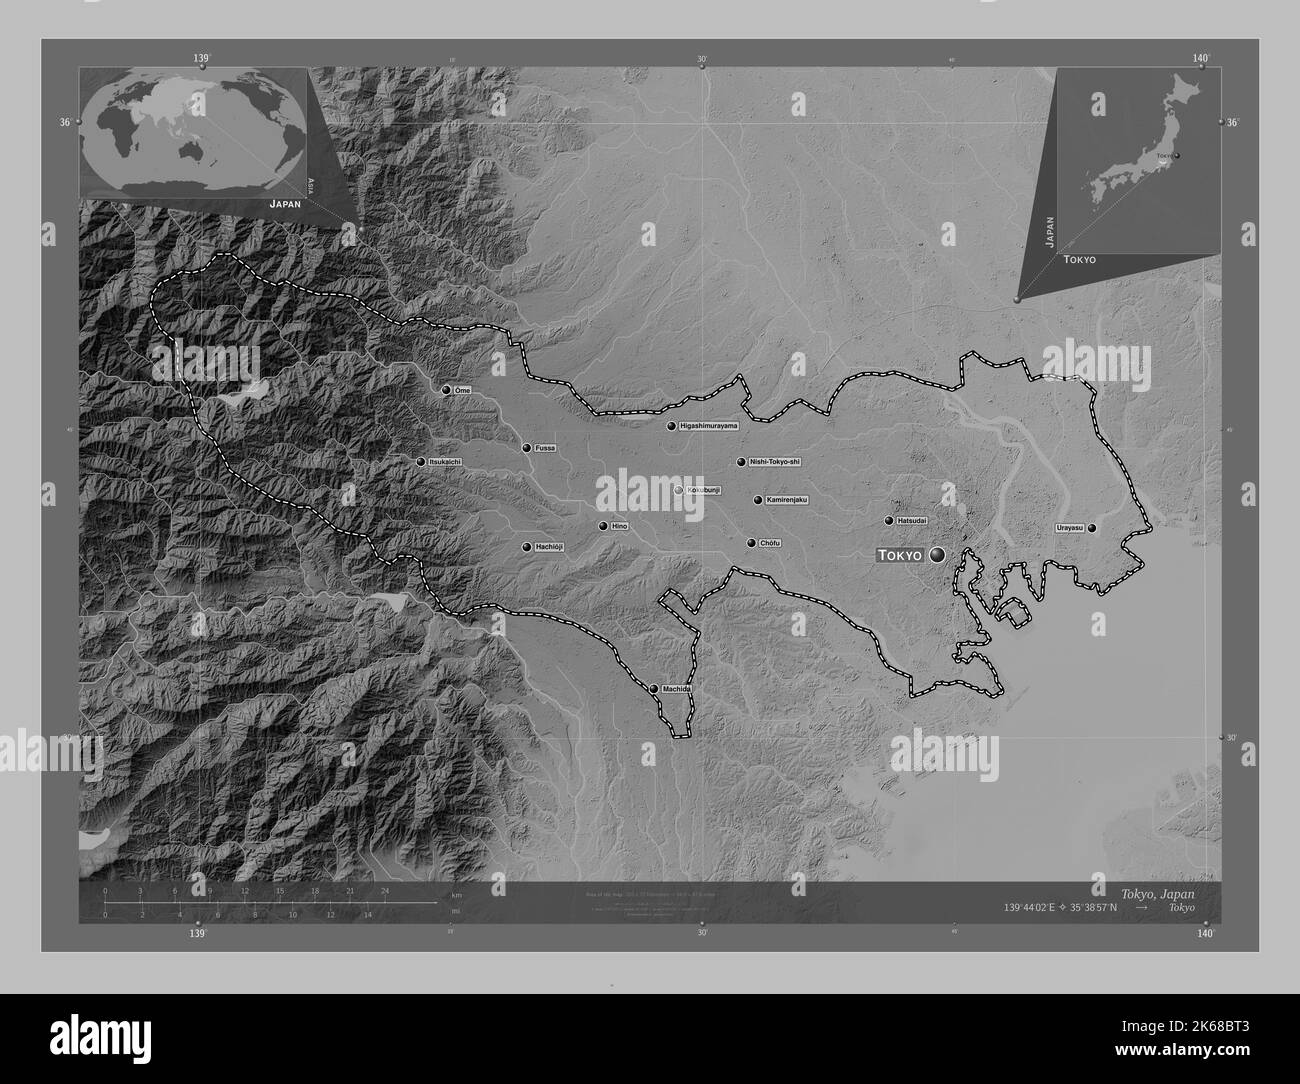 Tokyo, metropolis of Japan. Grayscale elevation map with lakes and rivers. Locations and names of major cities of the region. Corner auxiliary locatio Stock Photo